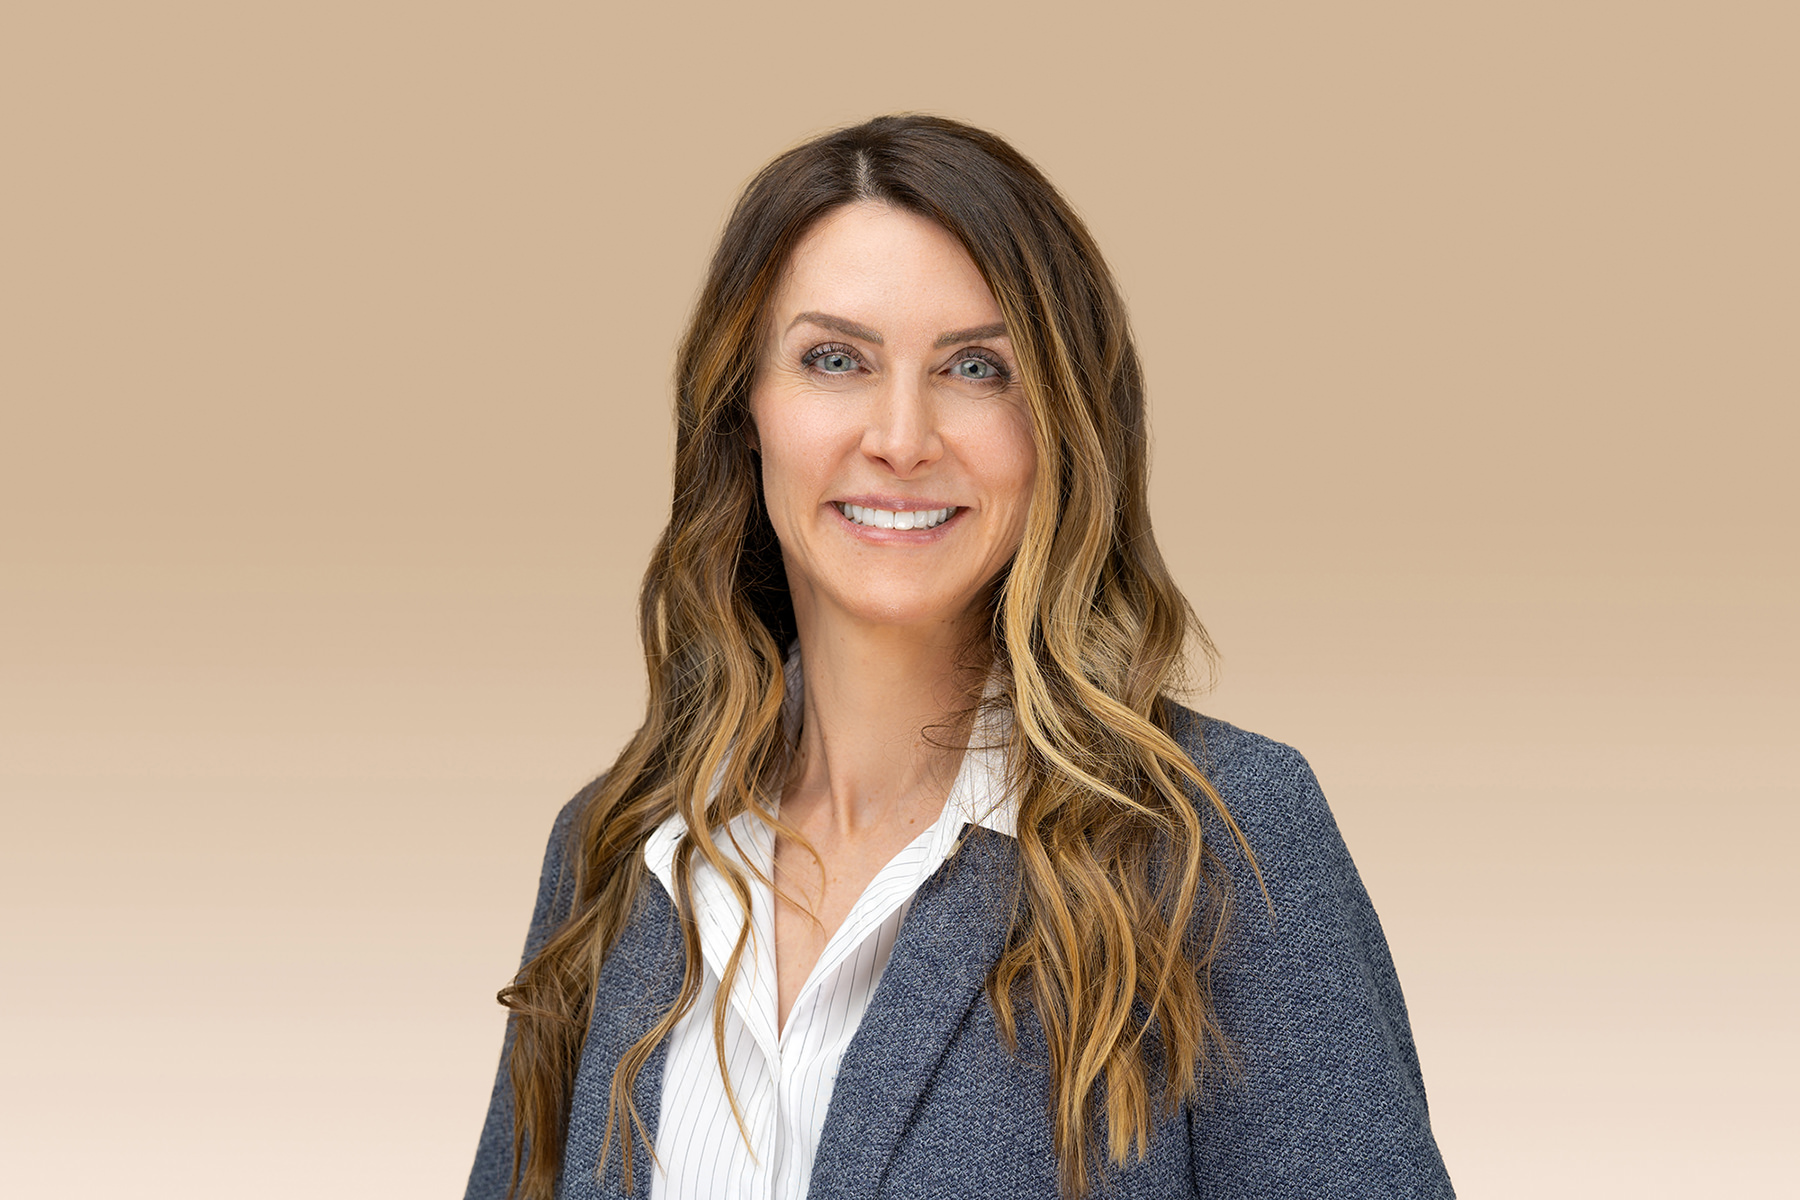 Professional woman in business attire, posing for Denver headshots, smiling against a neutral background.